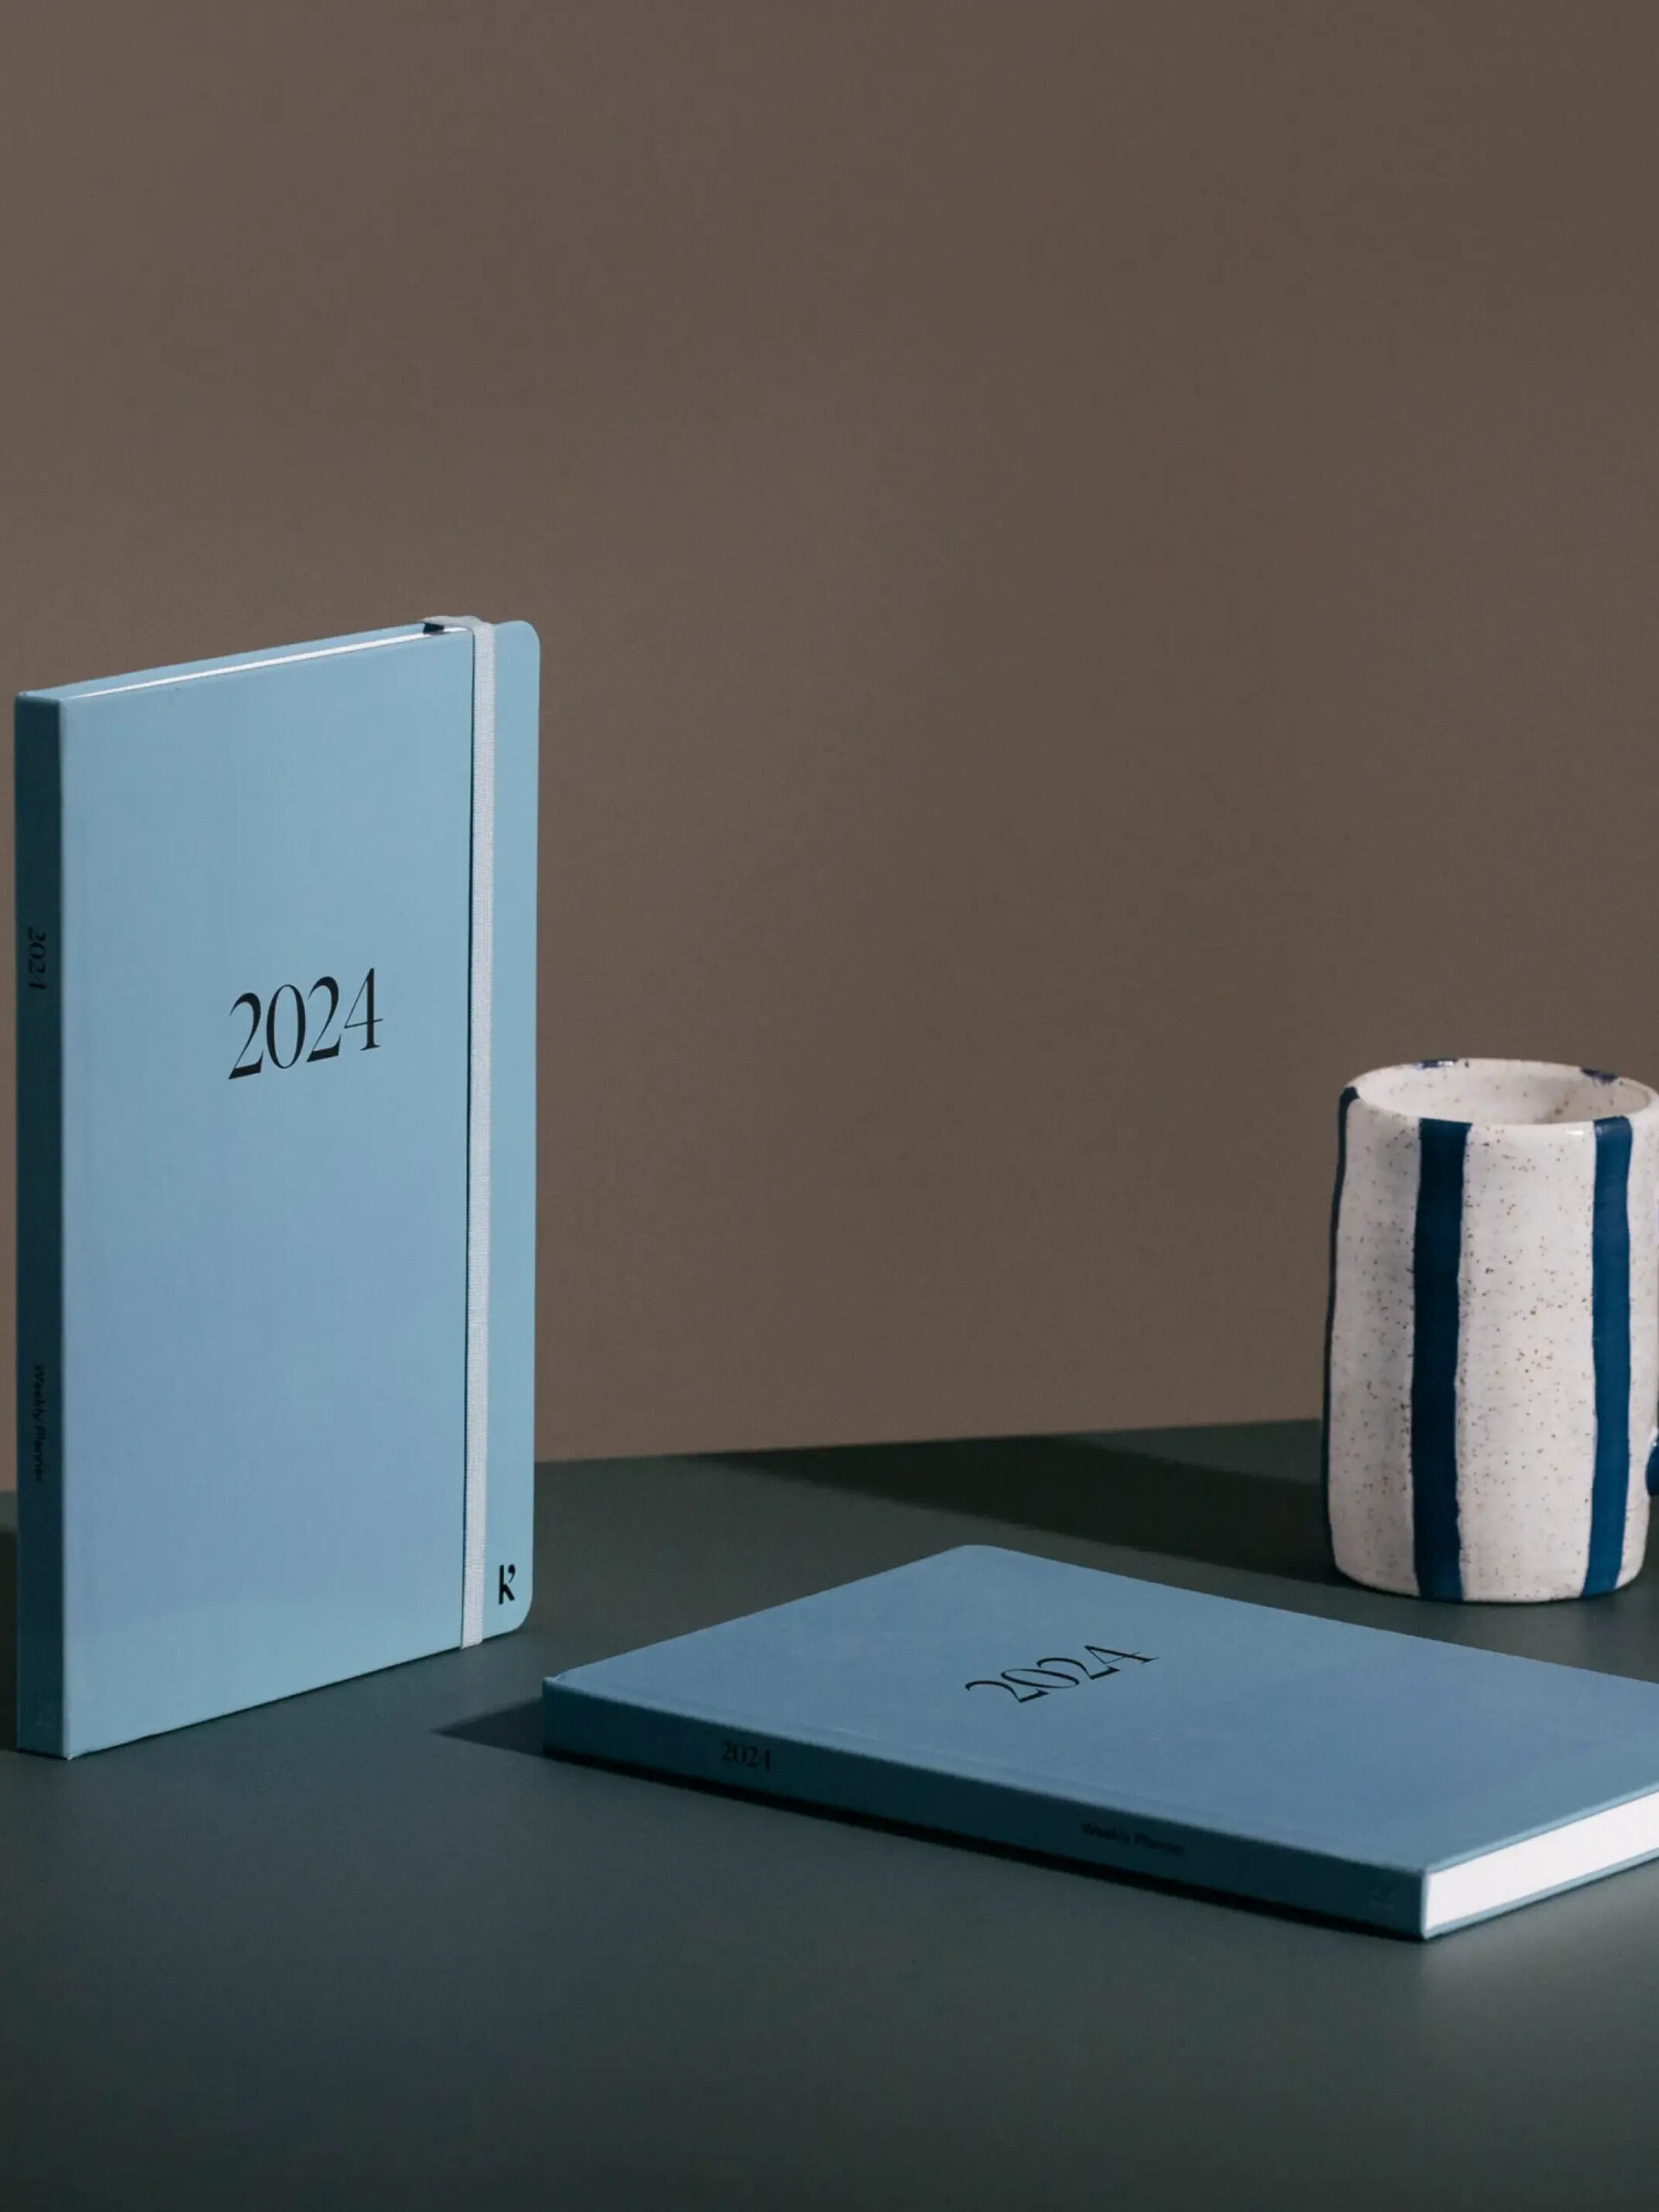 A studio shot of two 2024 planners by Karst next to a coffee mug.